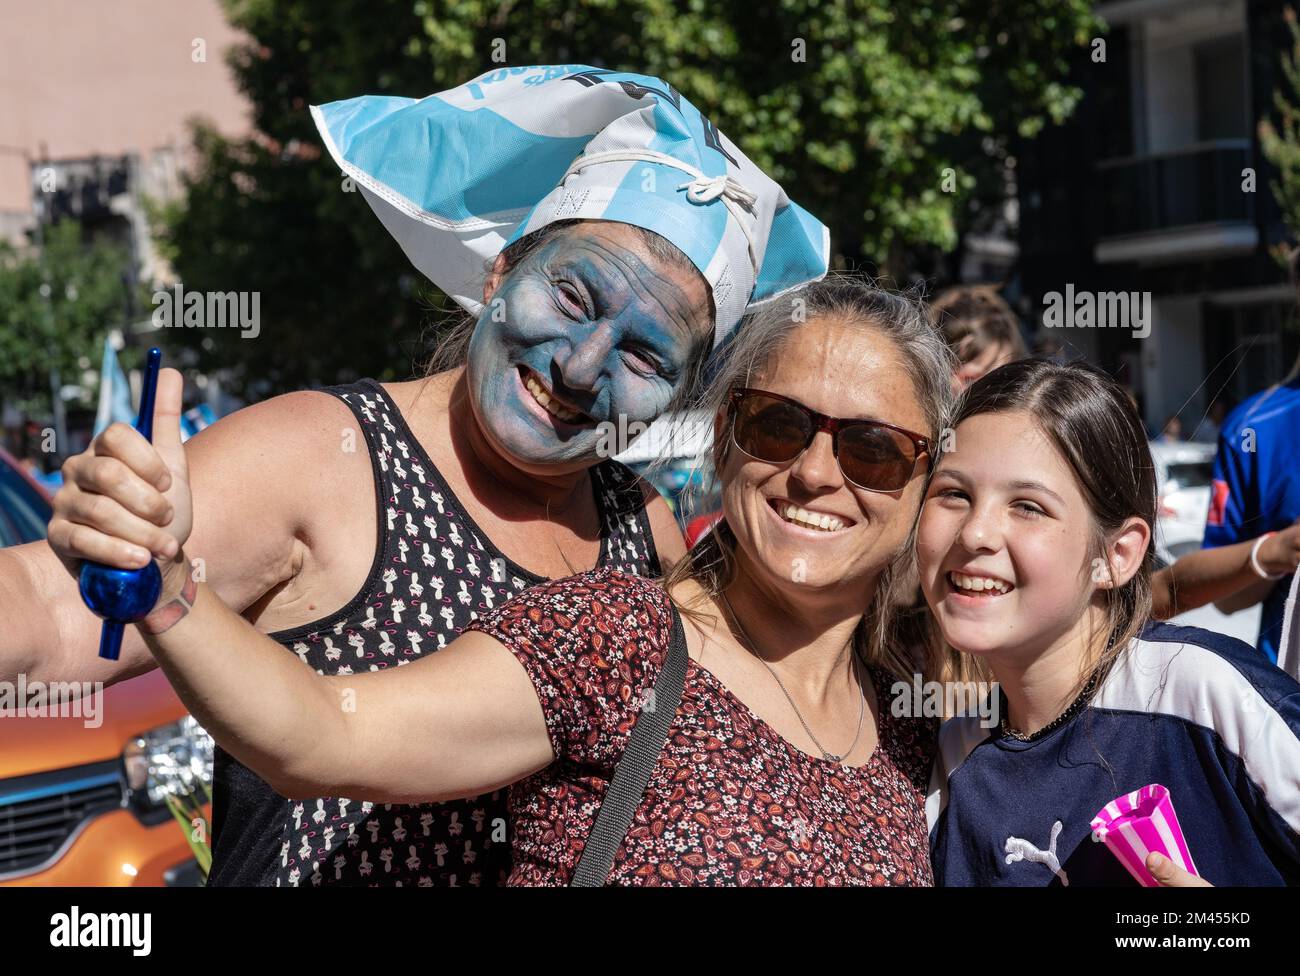 La Plata, Buenos Aires, Argentina - December 18, 2022: Fans celebrate Argentina winning the 2022 FIFA World Cup in Qatar. Stock Photo